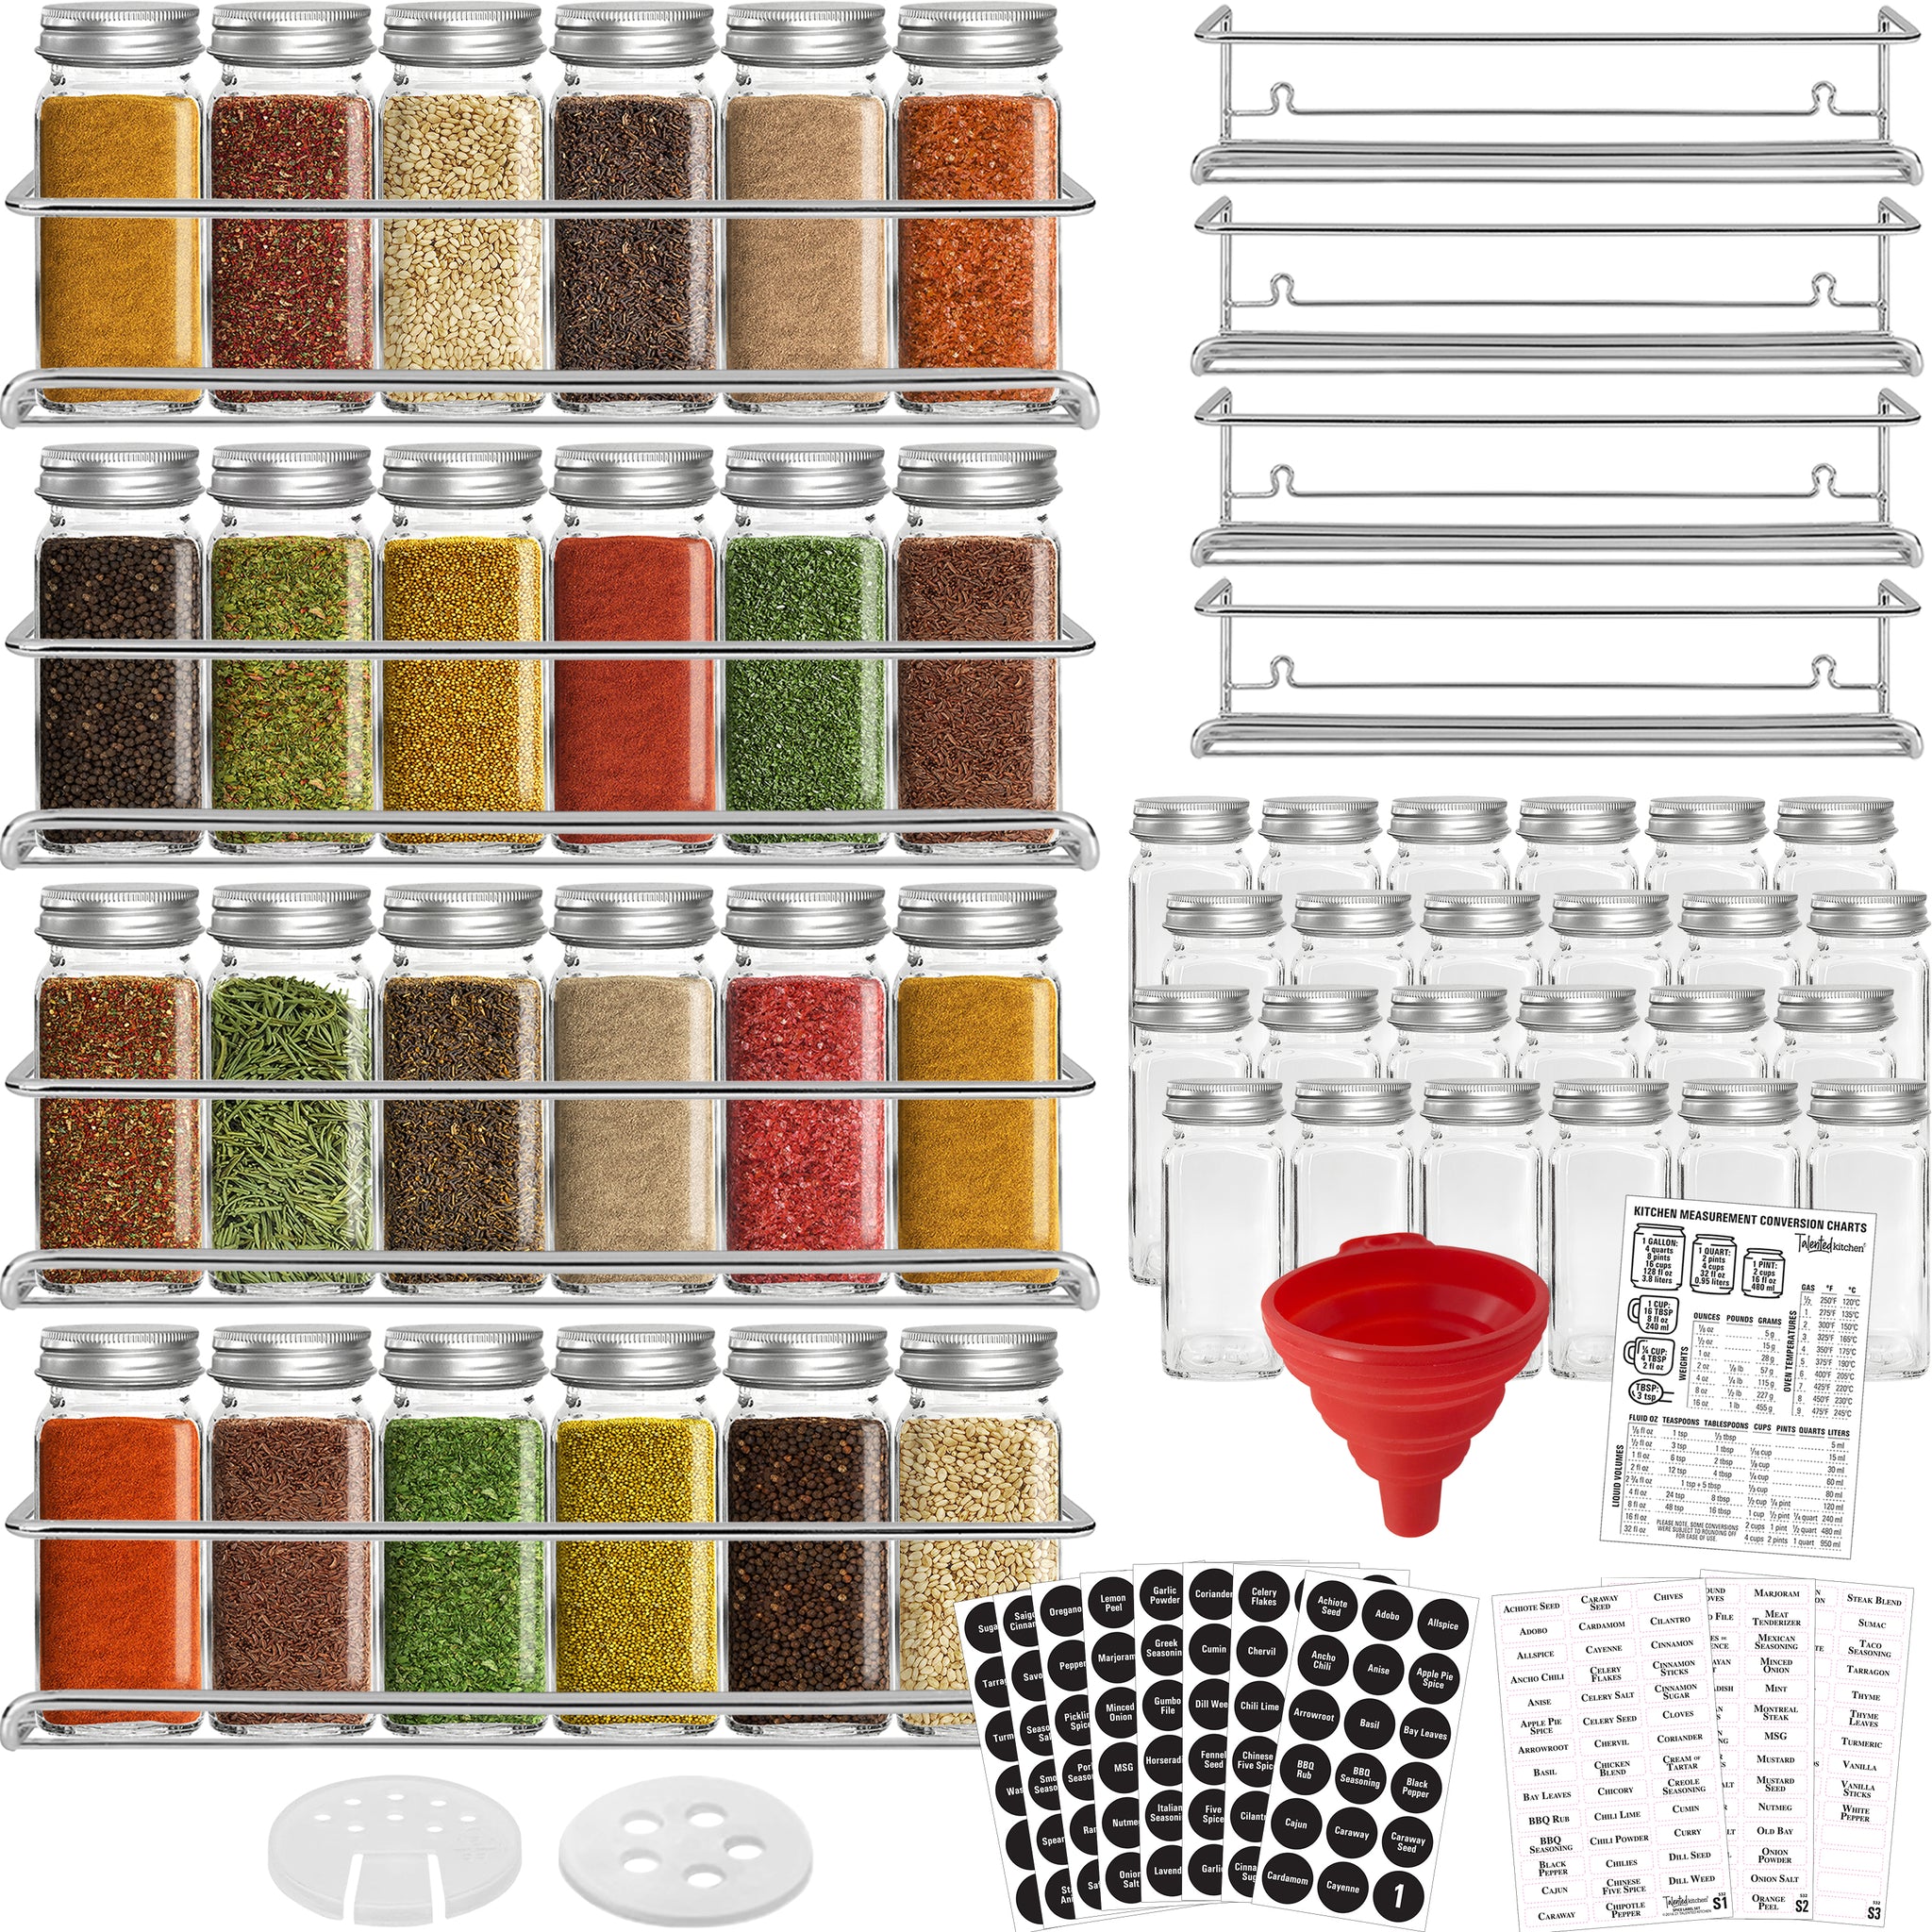 Talented Kitchen 14 Pcs Large 6 oz Glass Spice Jars with Labels and Shakers  Lids, Empty Seasoning Containers with Funnel, Magnetic Conversion Chart,  269 Preprinted Stickers in 2 Styles